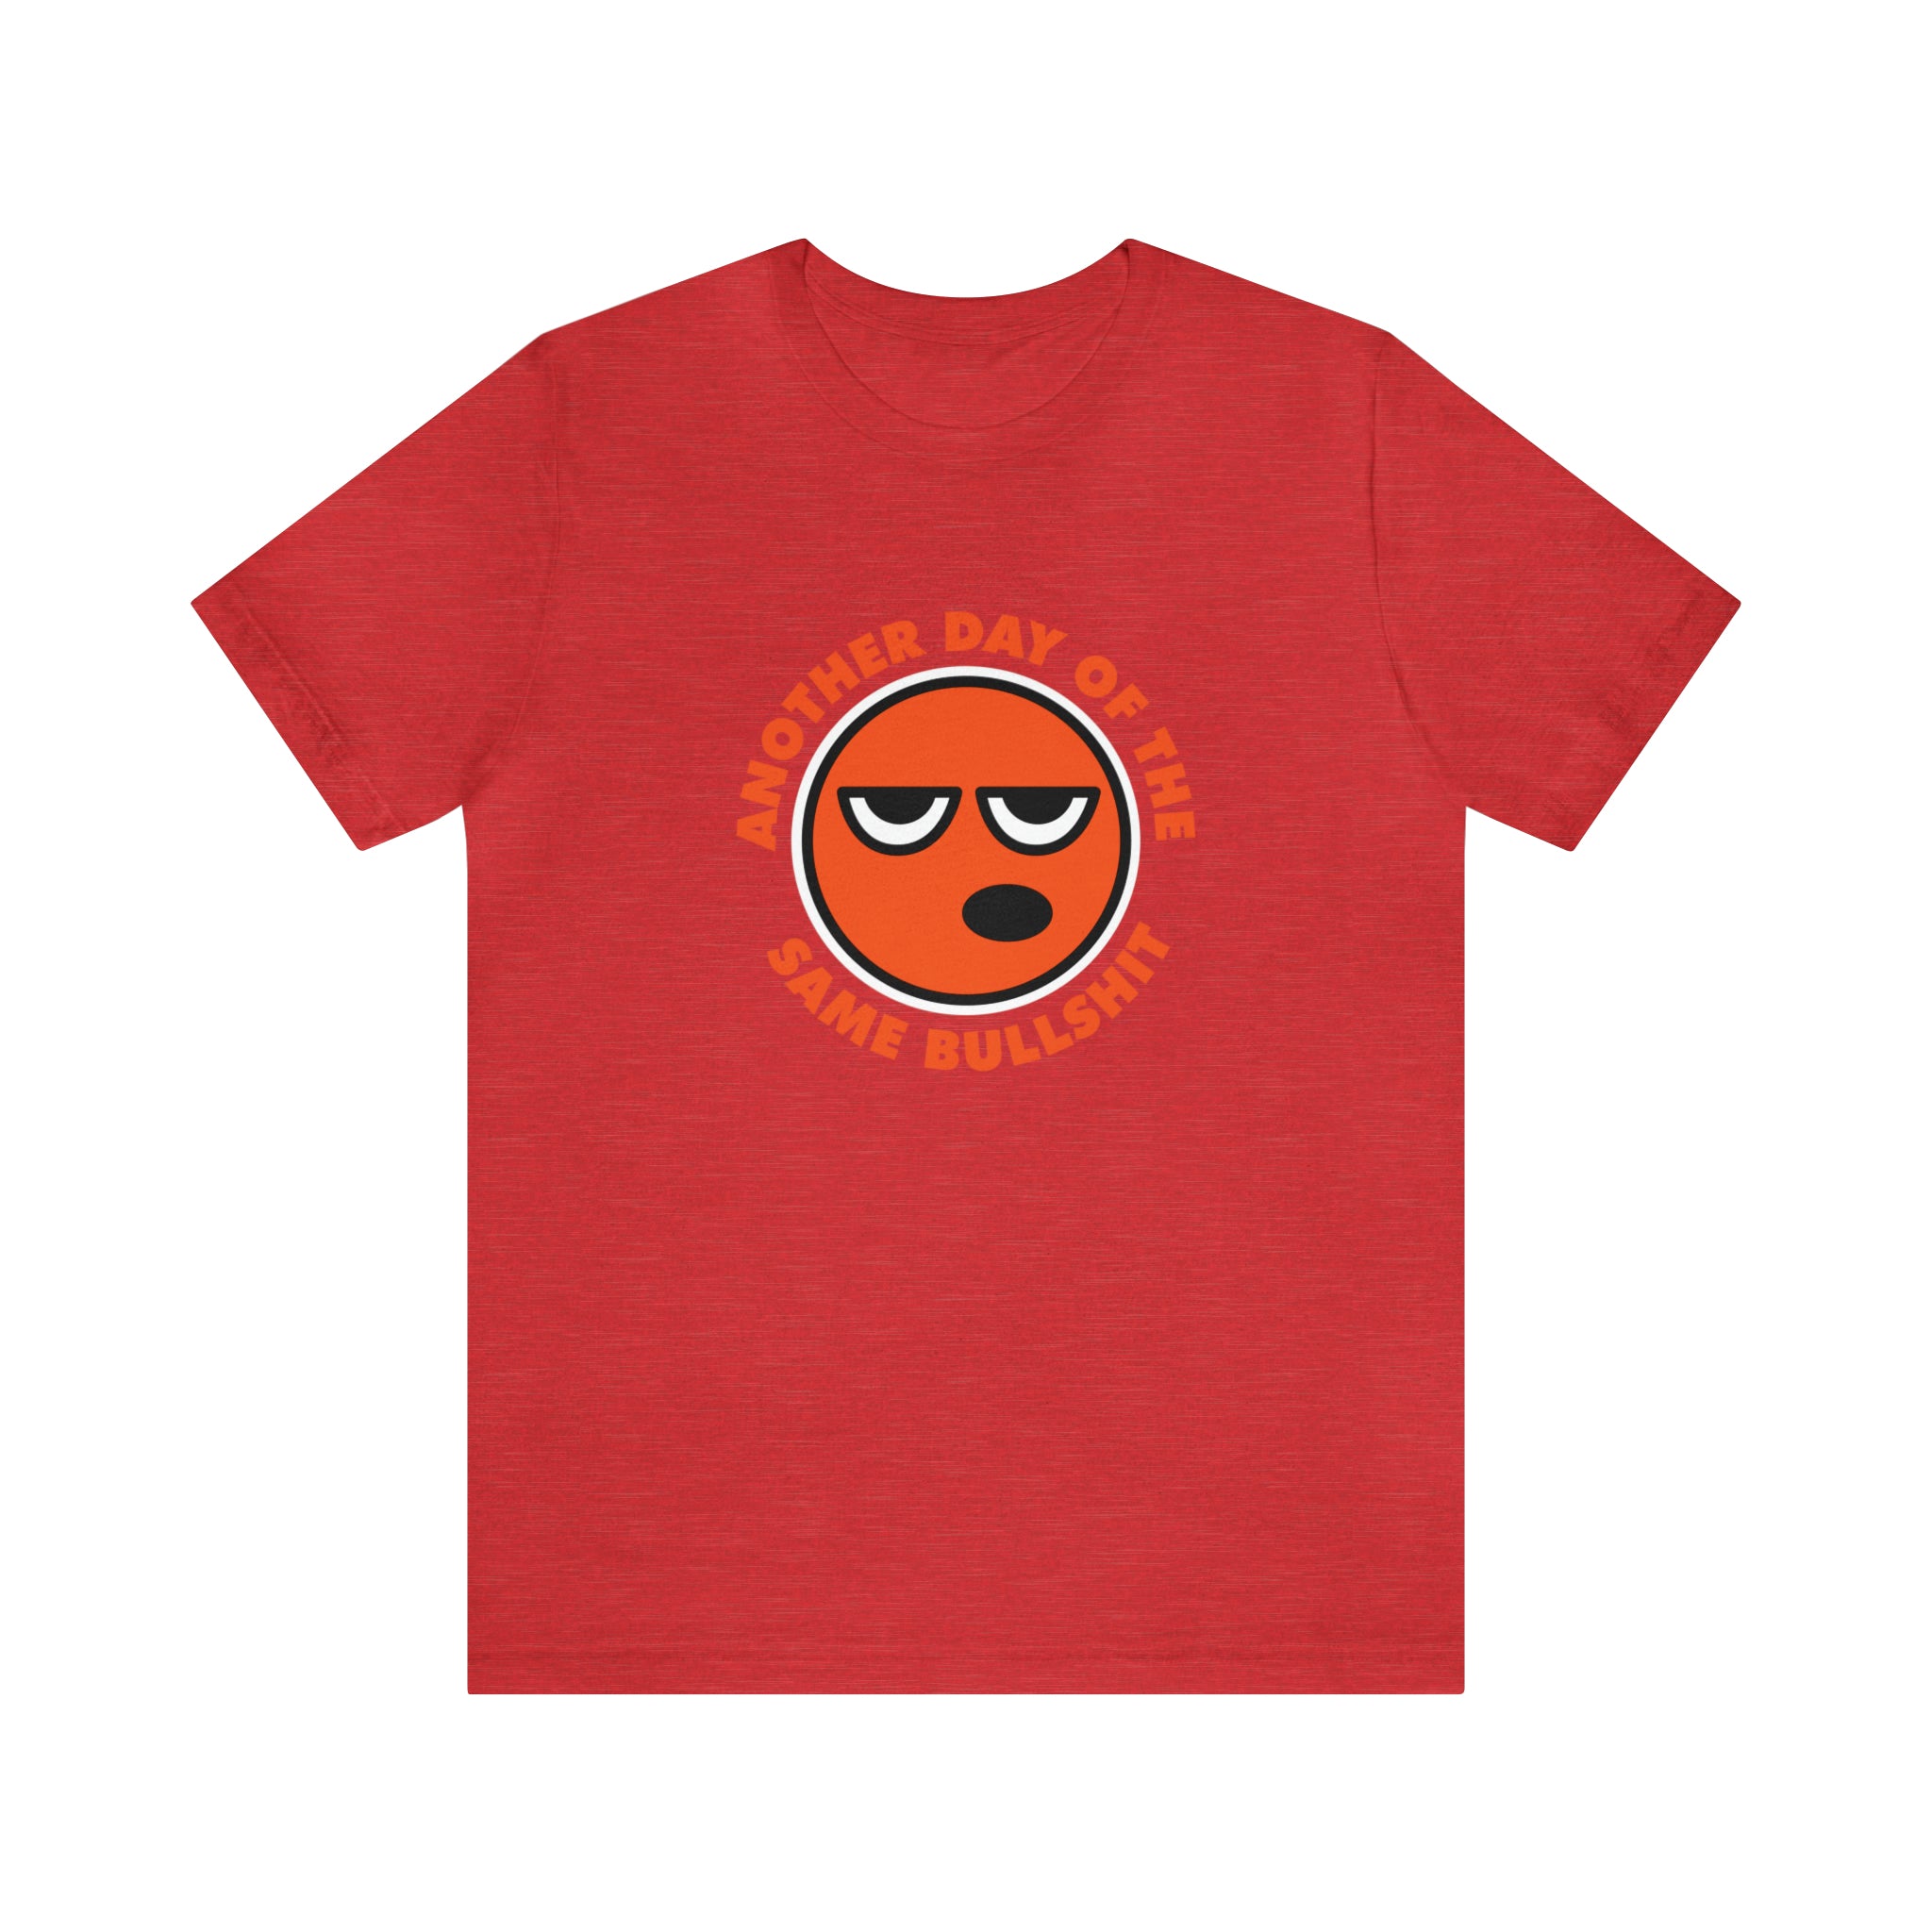 A Another Day of the Same Bullshit T-shirt with an orange face design for a bold look.